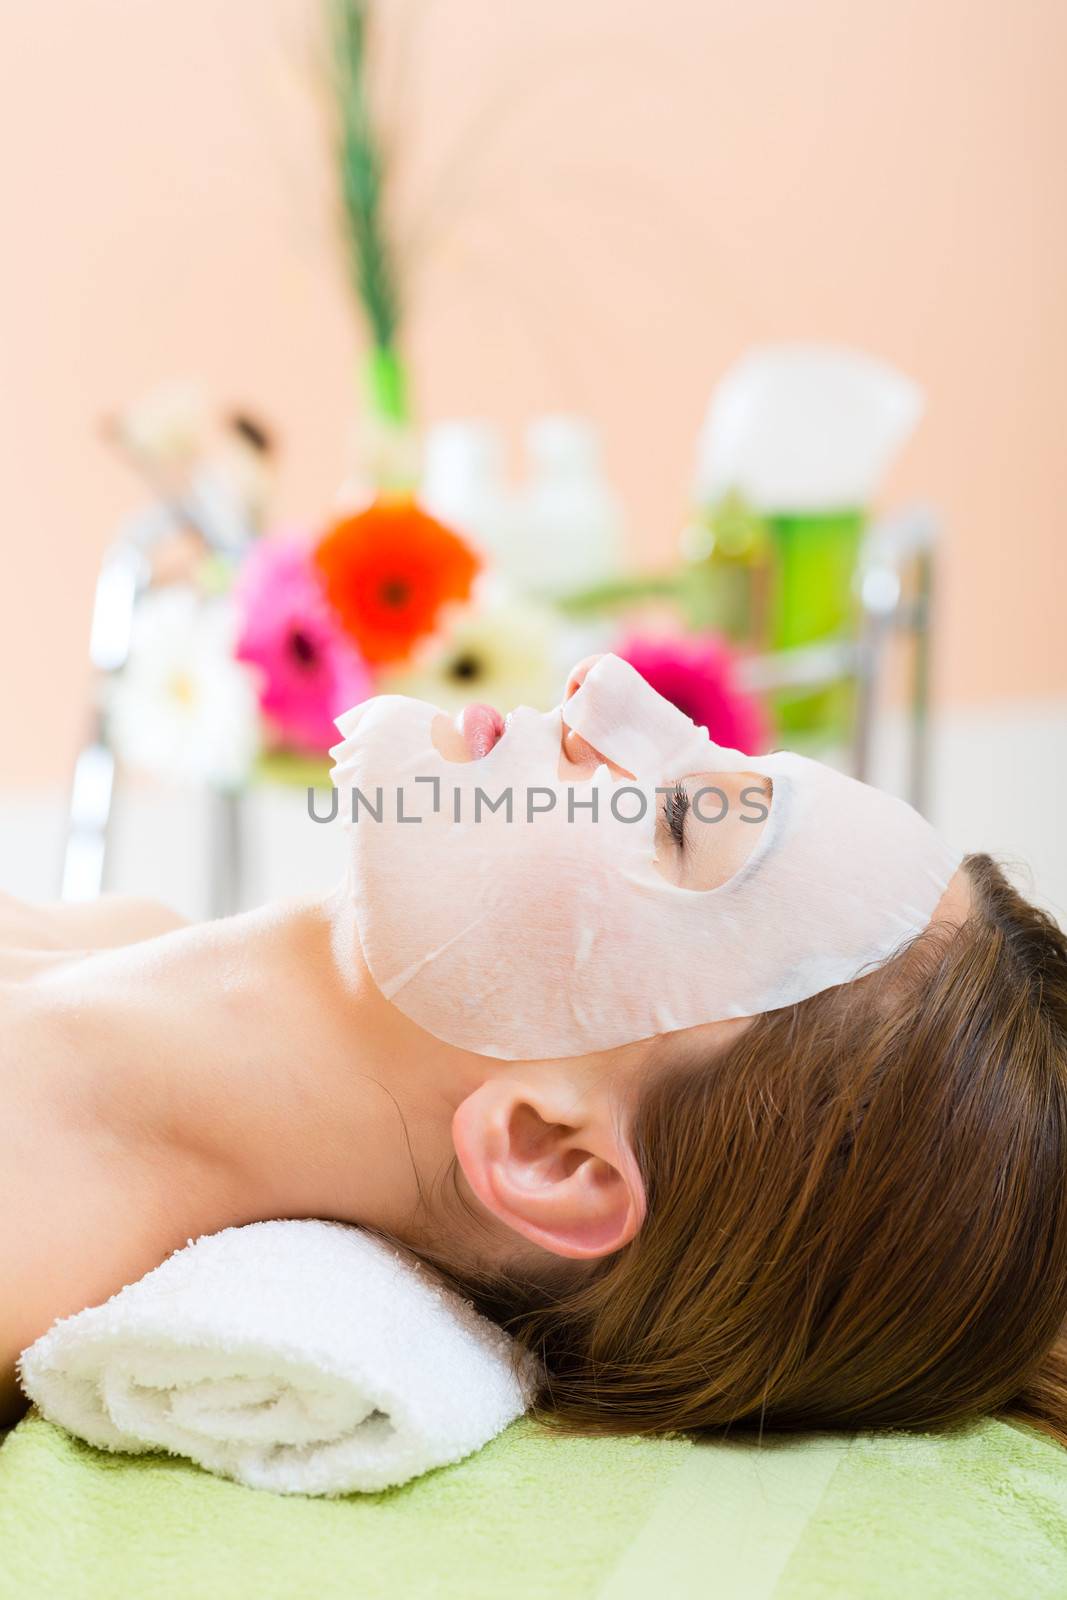 Wellness - woman receiving facial mask in spa for clean skin